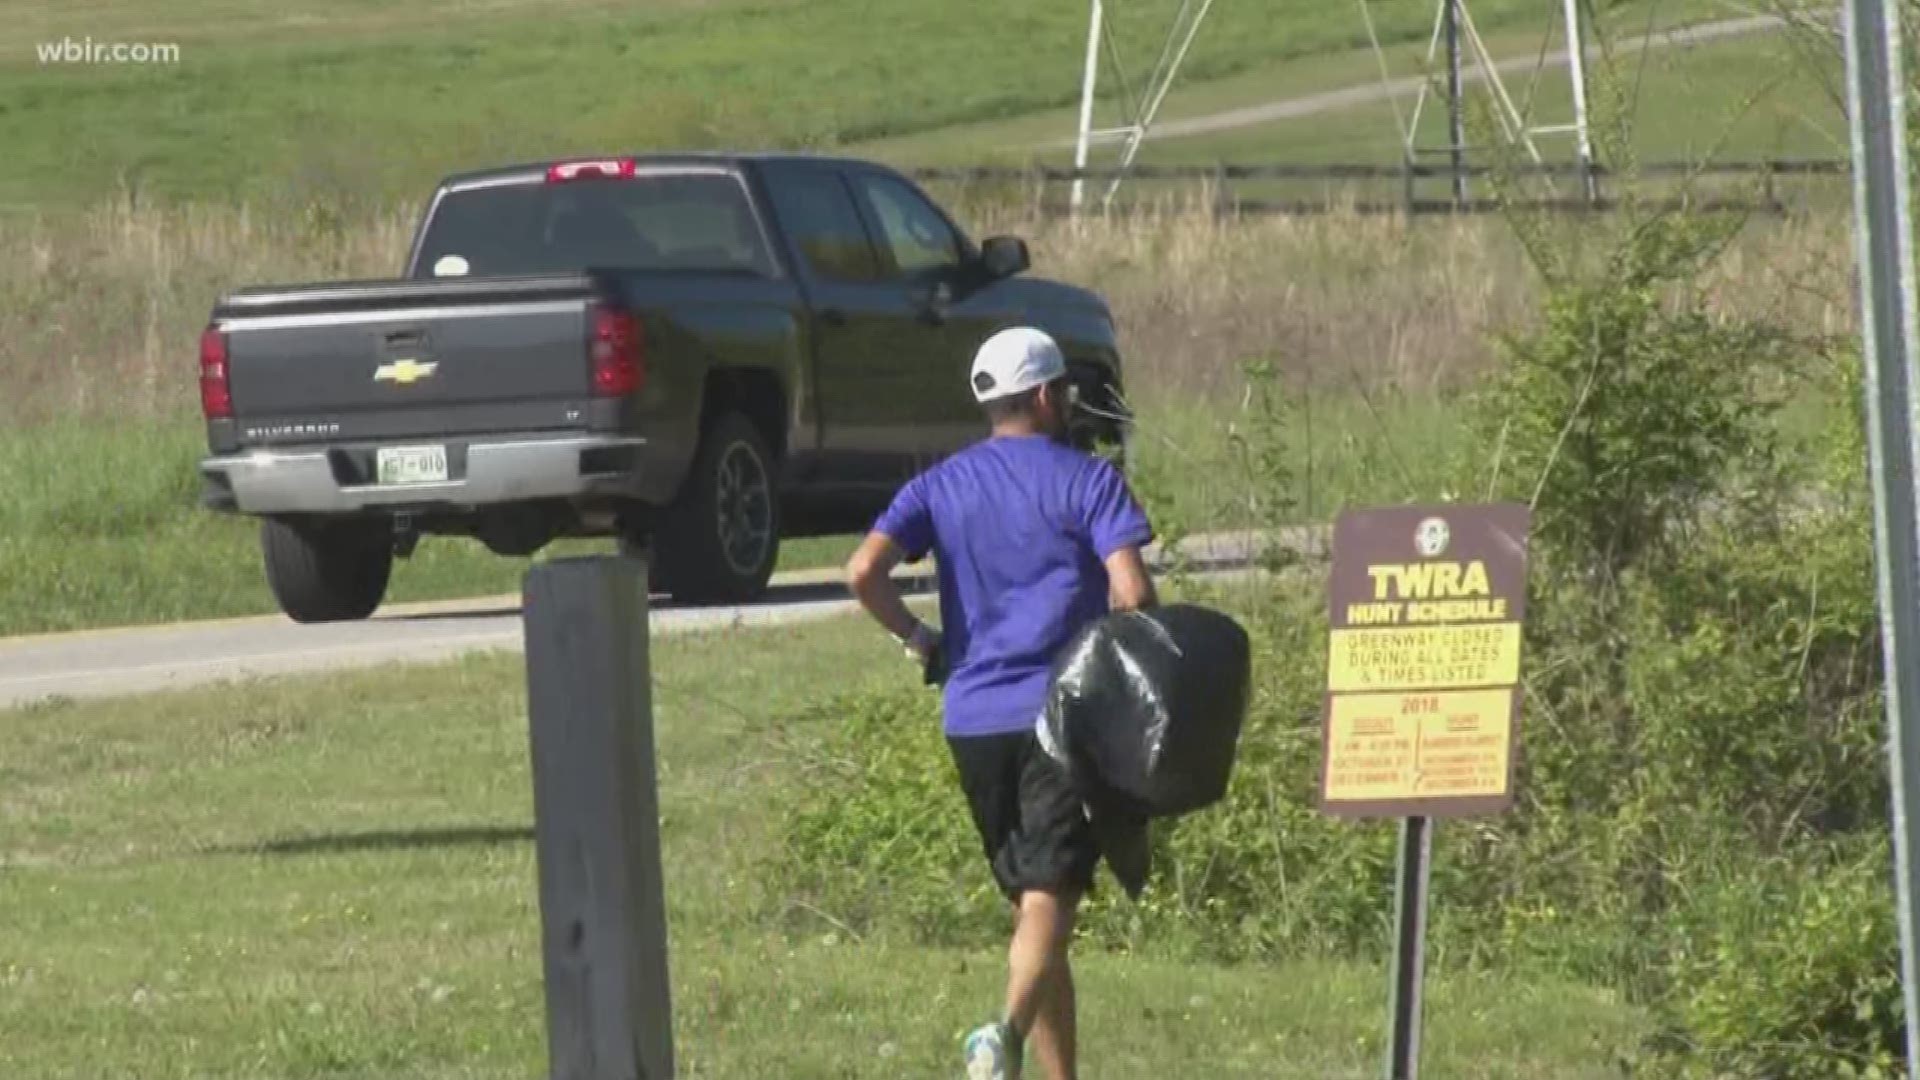 Not only did they get their exercise, but they collected hundreds of pounds of trash on the way.